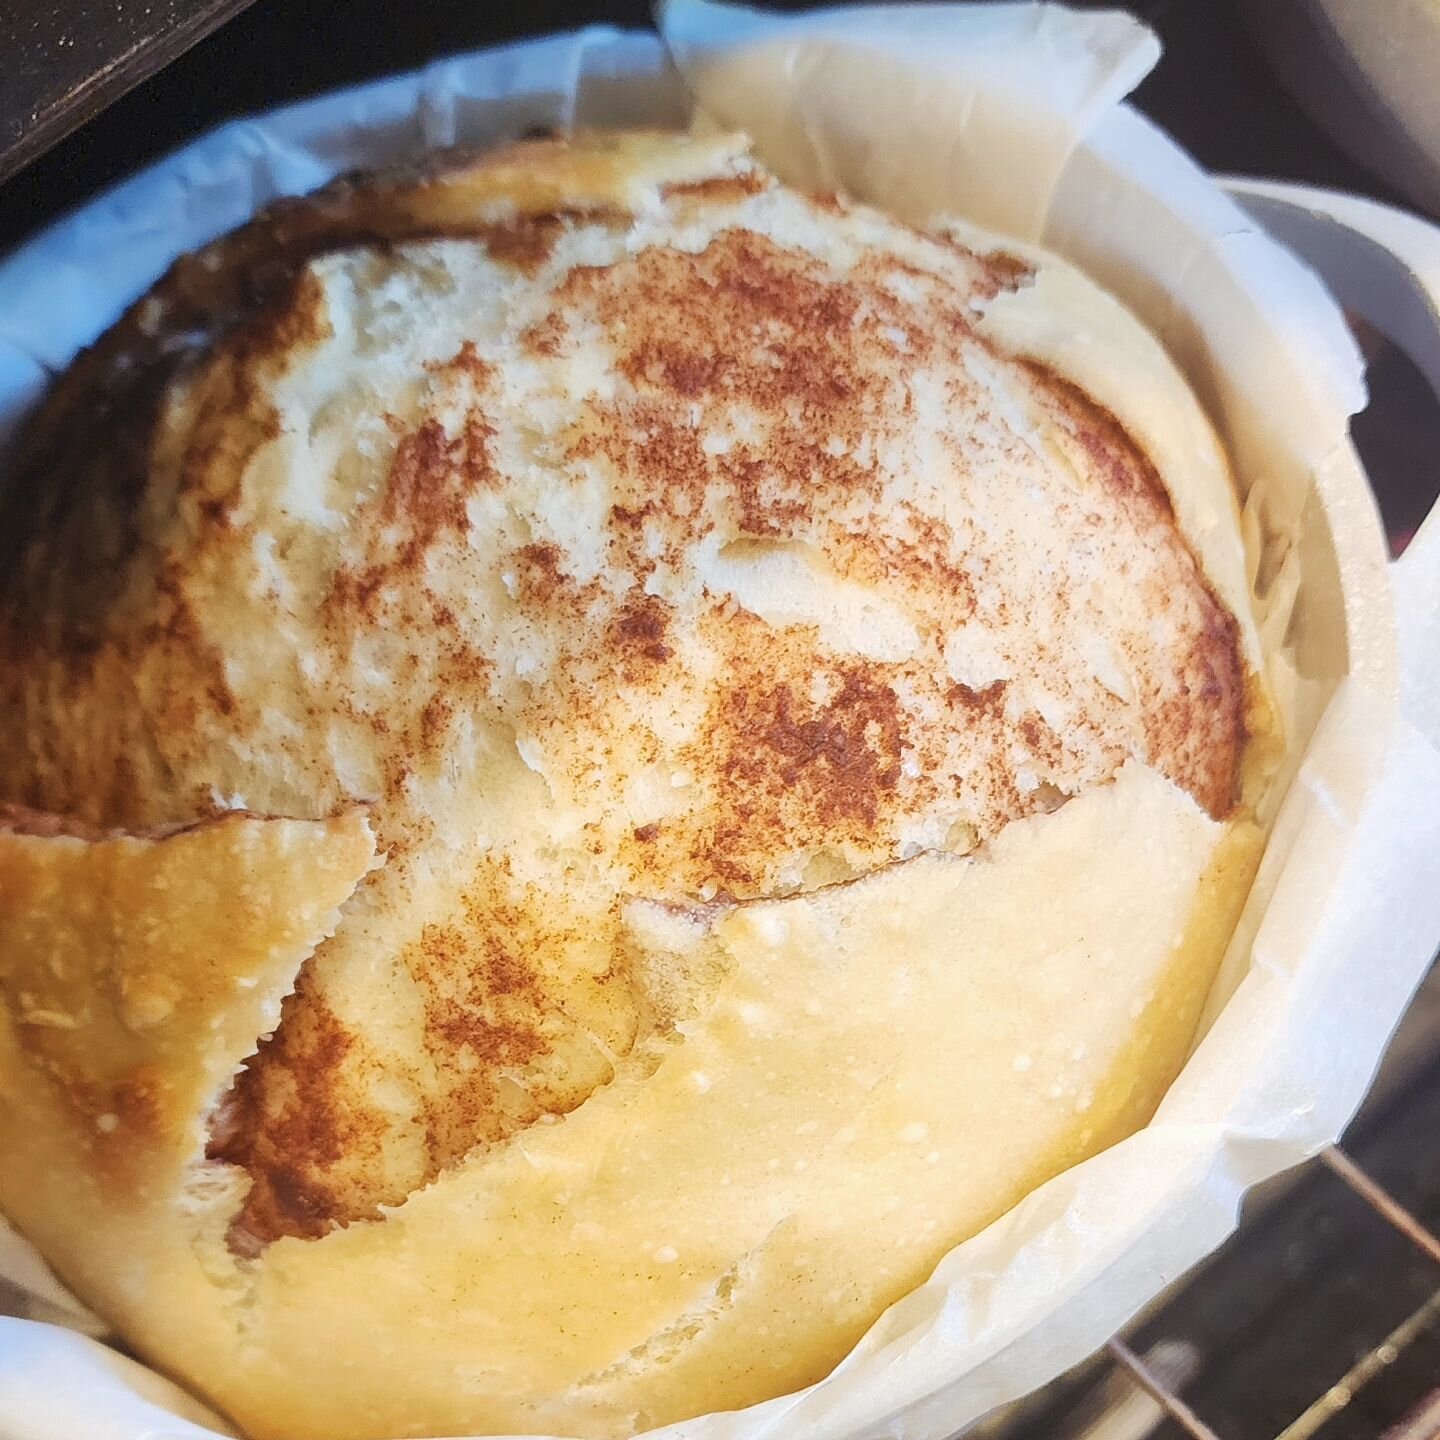 POV, you start a sourdough journey and pleasantly discover joy in baking again &amp; eating baked goods because they don't bother your stomach with sourdough and find your true calling is...
KEEPER OF THE WILD YEAST!
I have several heirloom sourdough